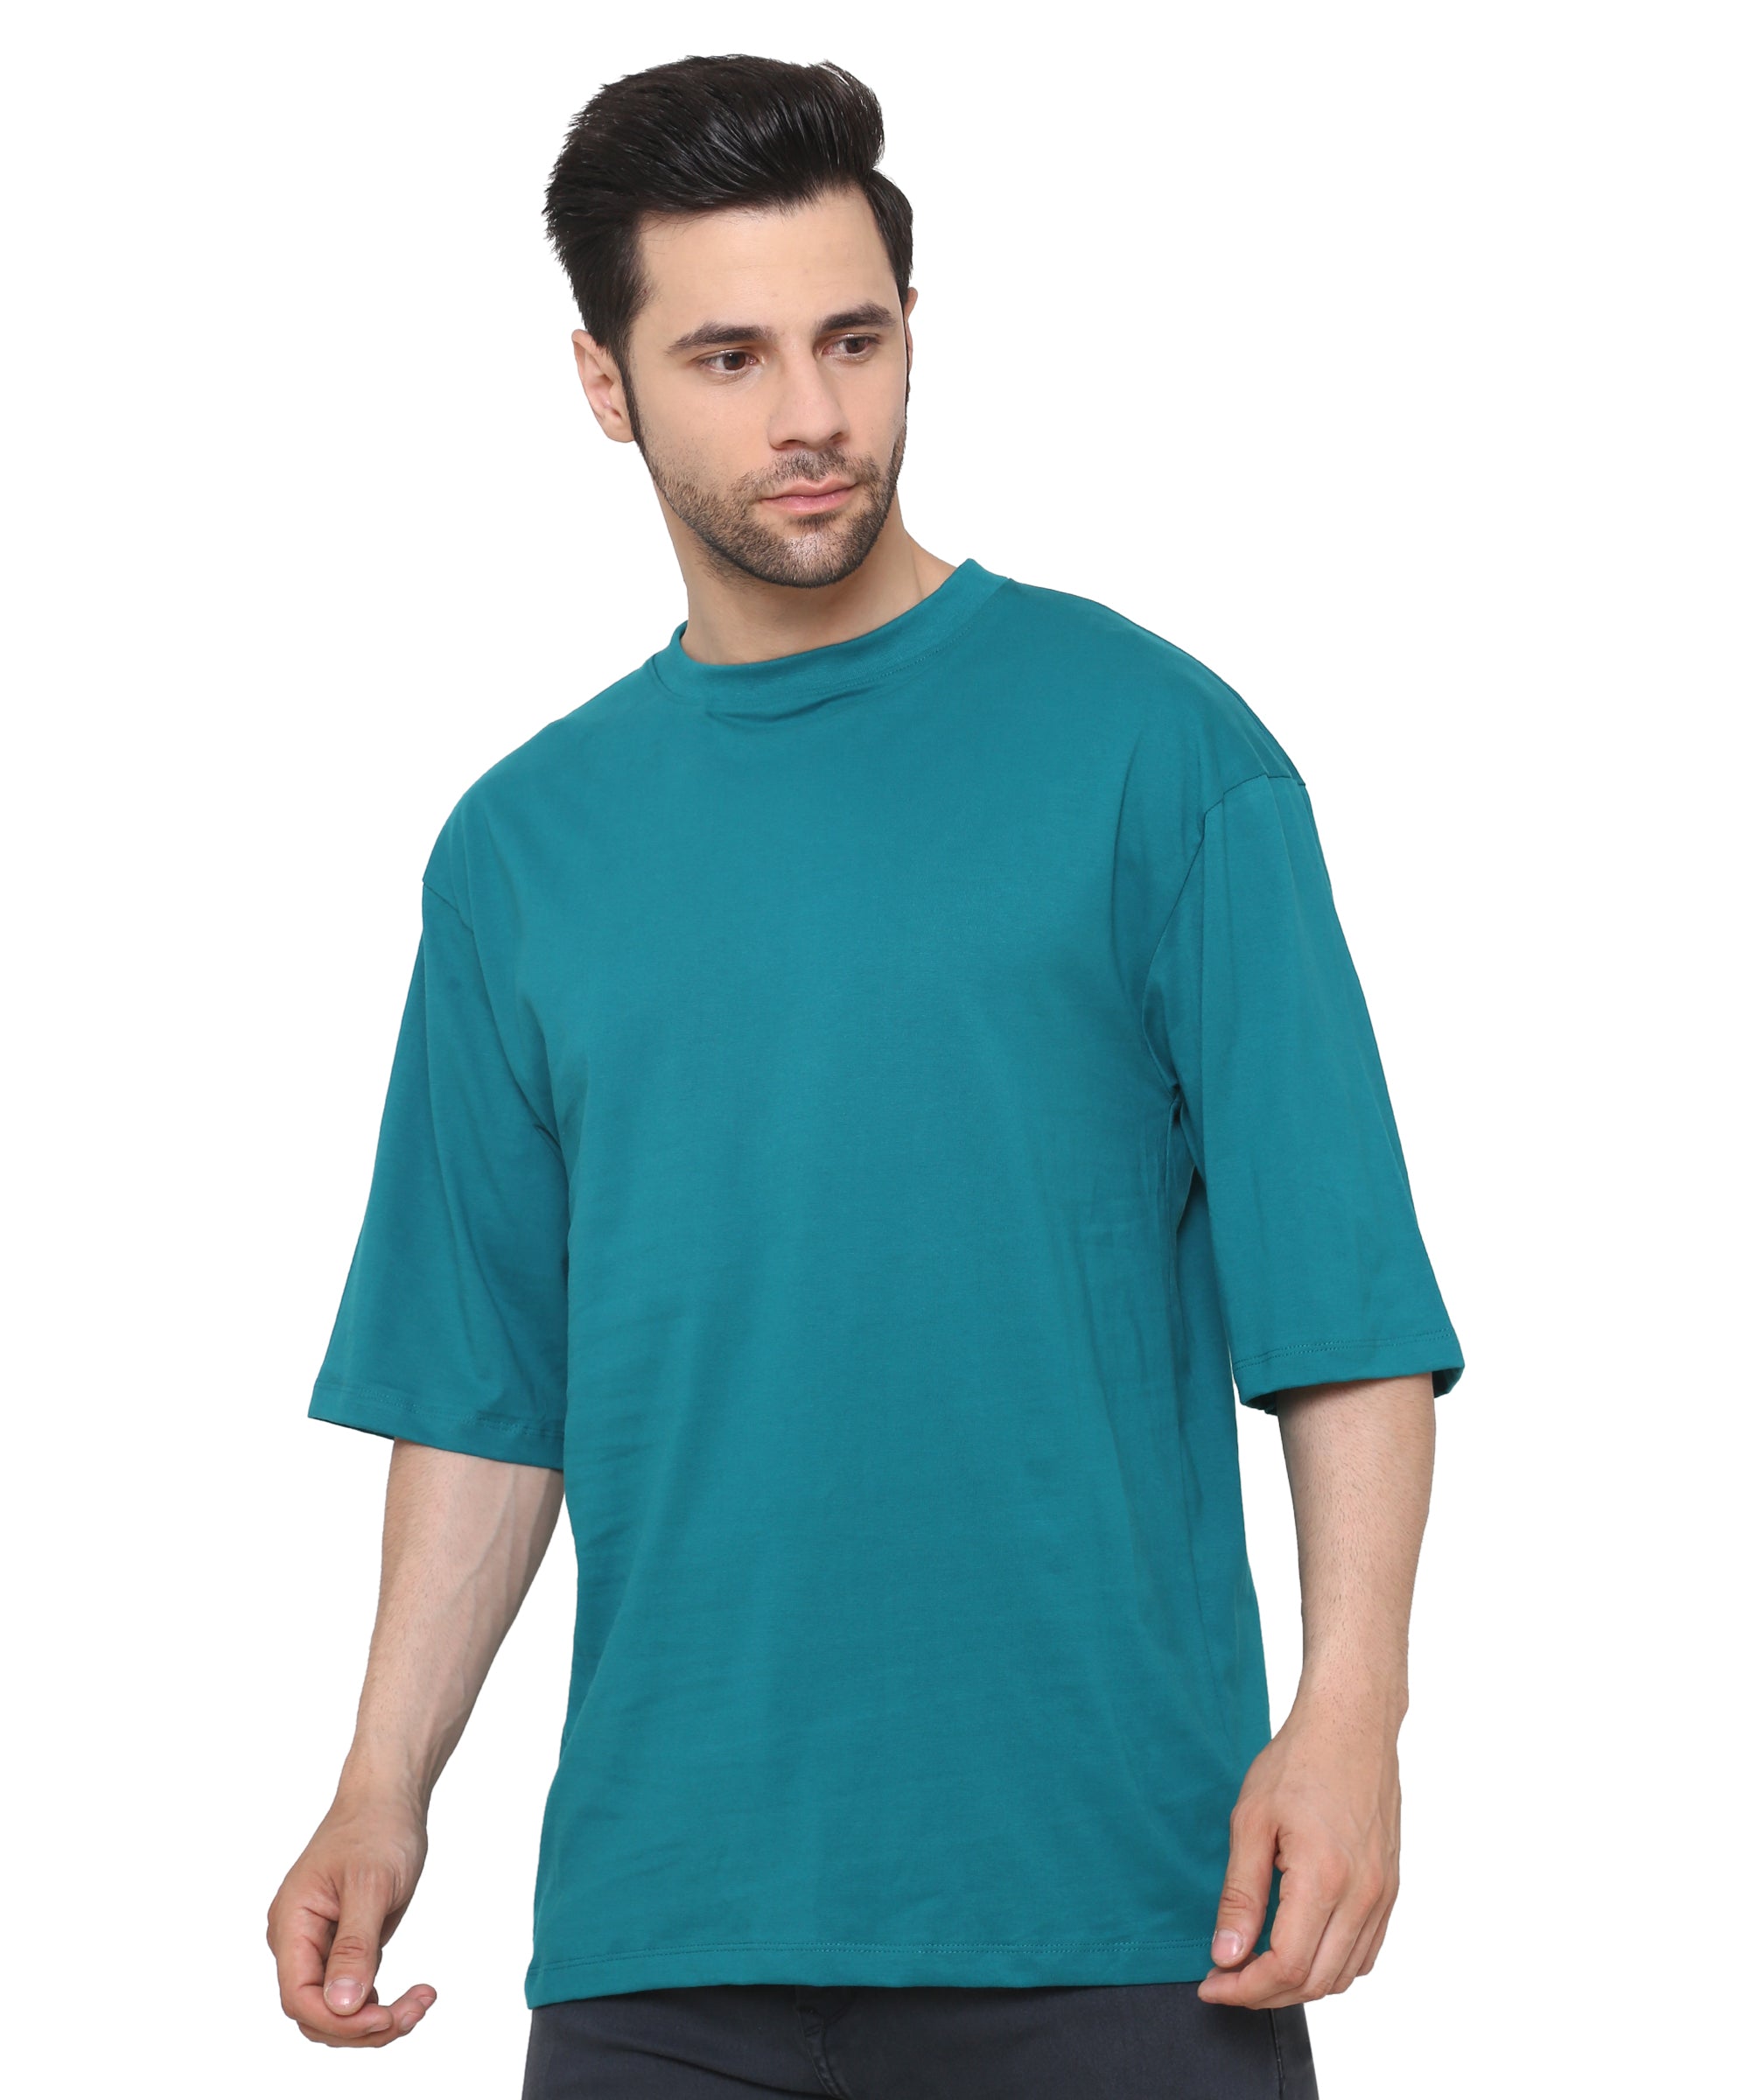 Ocean Oversized Cotton T-shirts Relaxed Fit Tees for Men